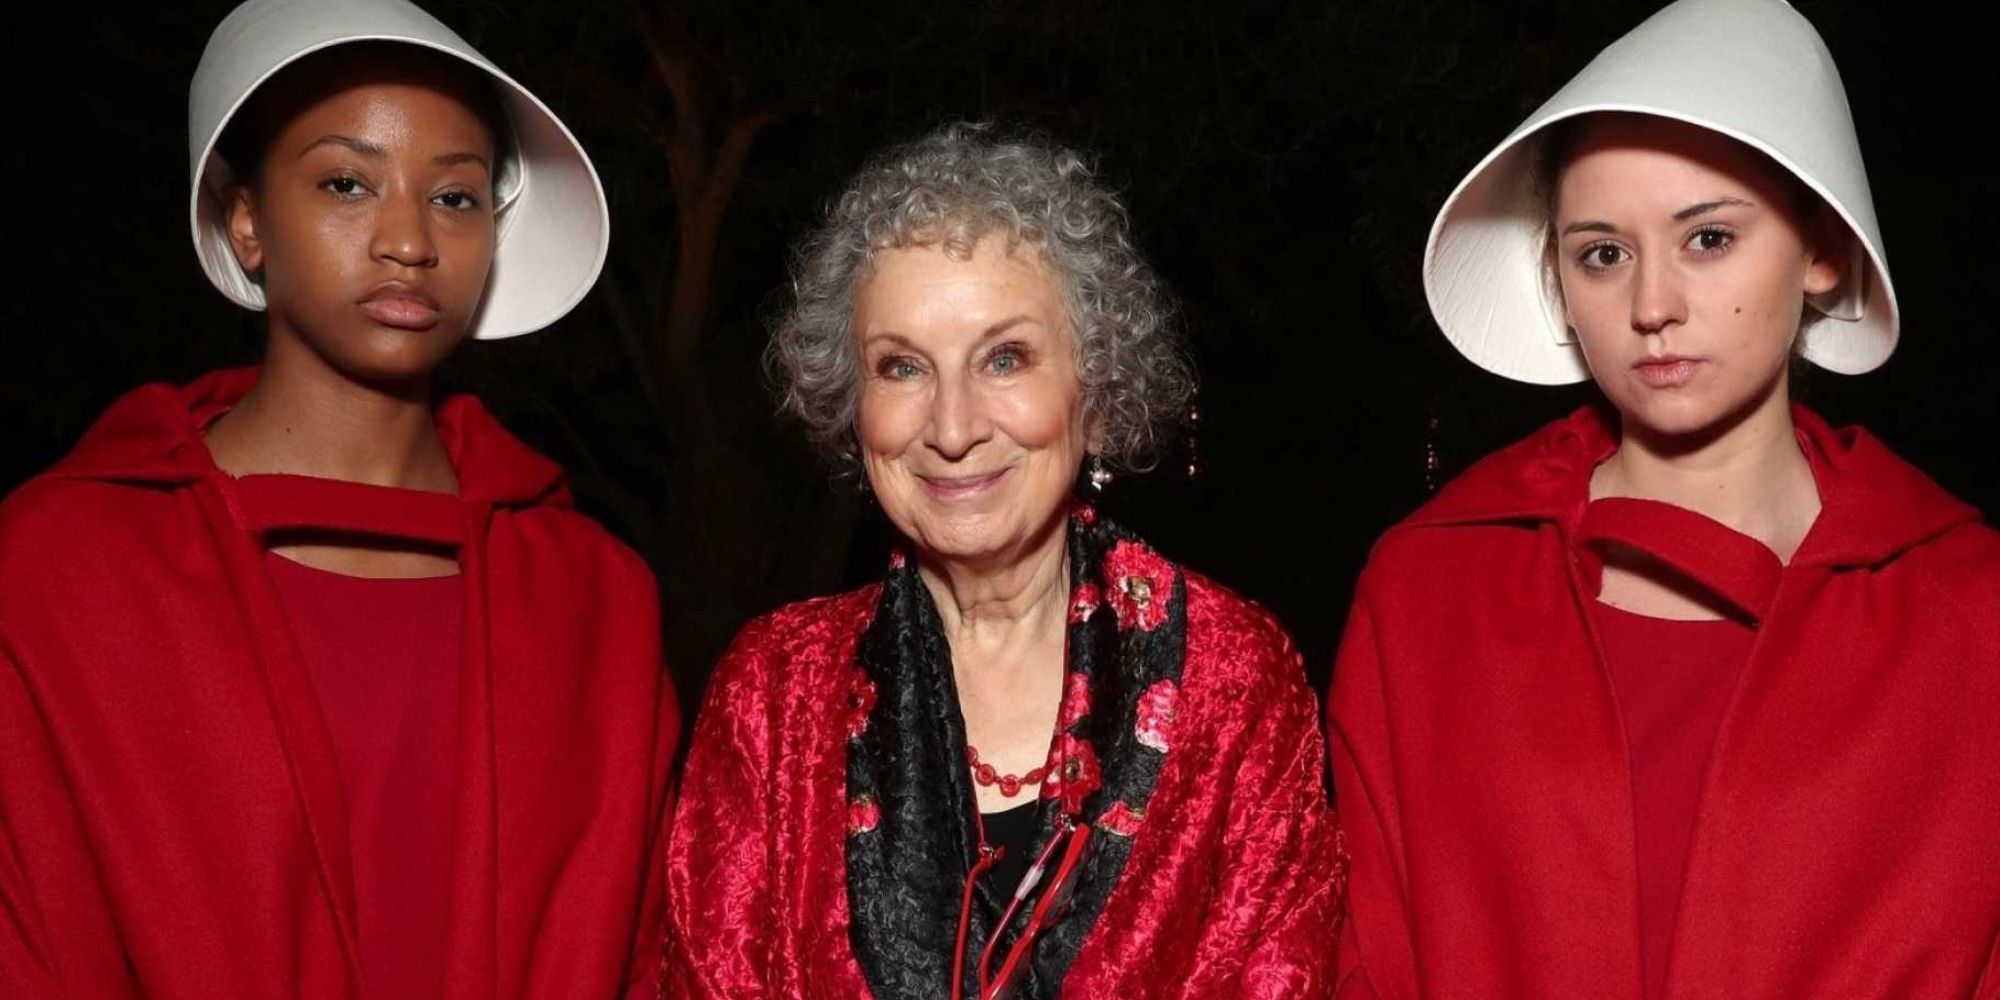 Margaret Atwood standing with two people dressed as handmaids